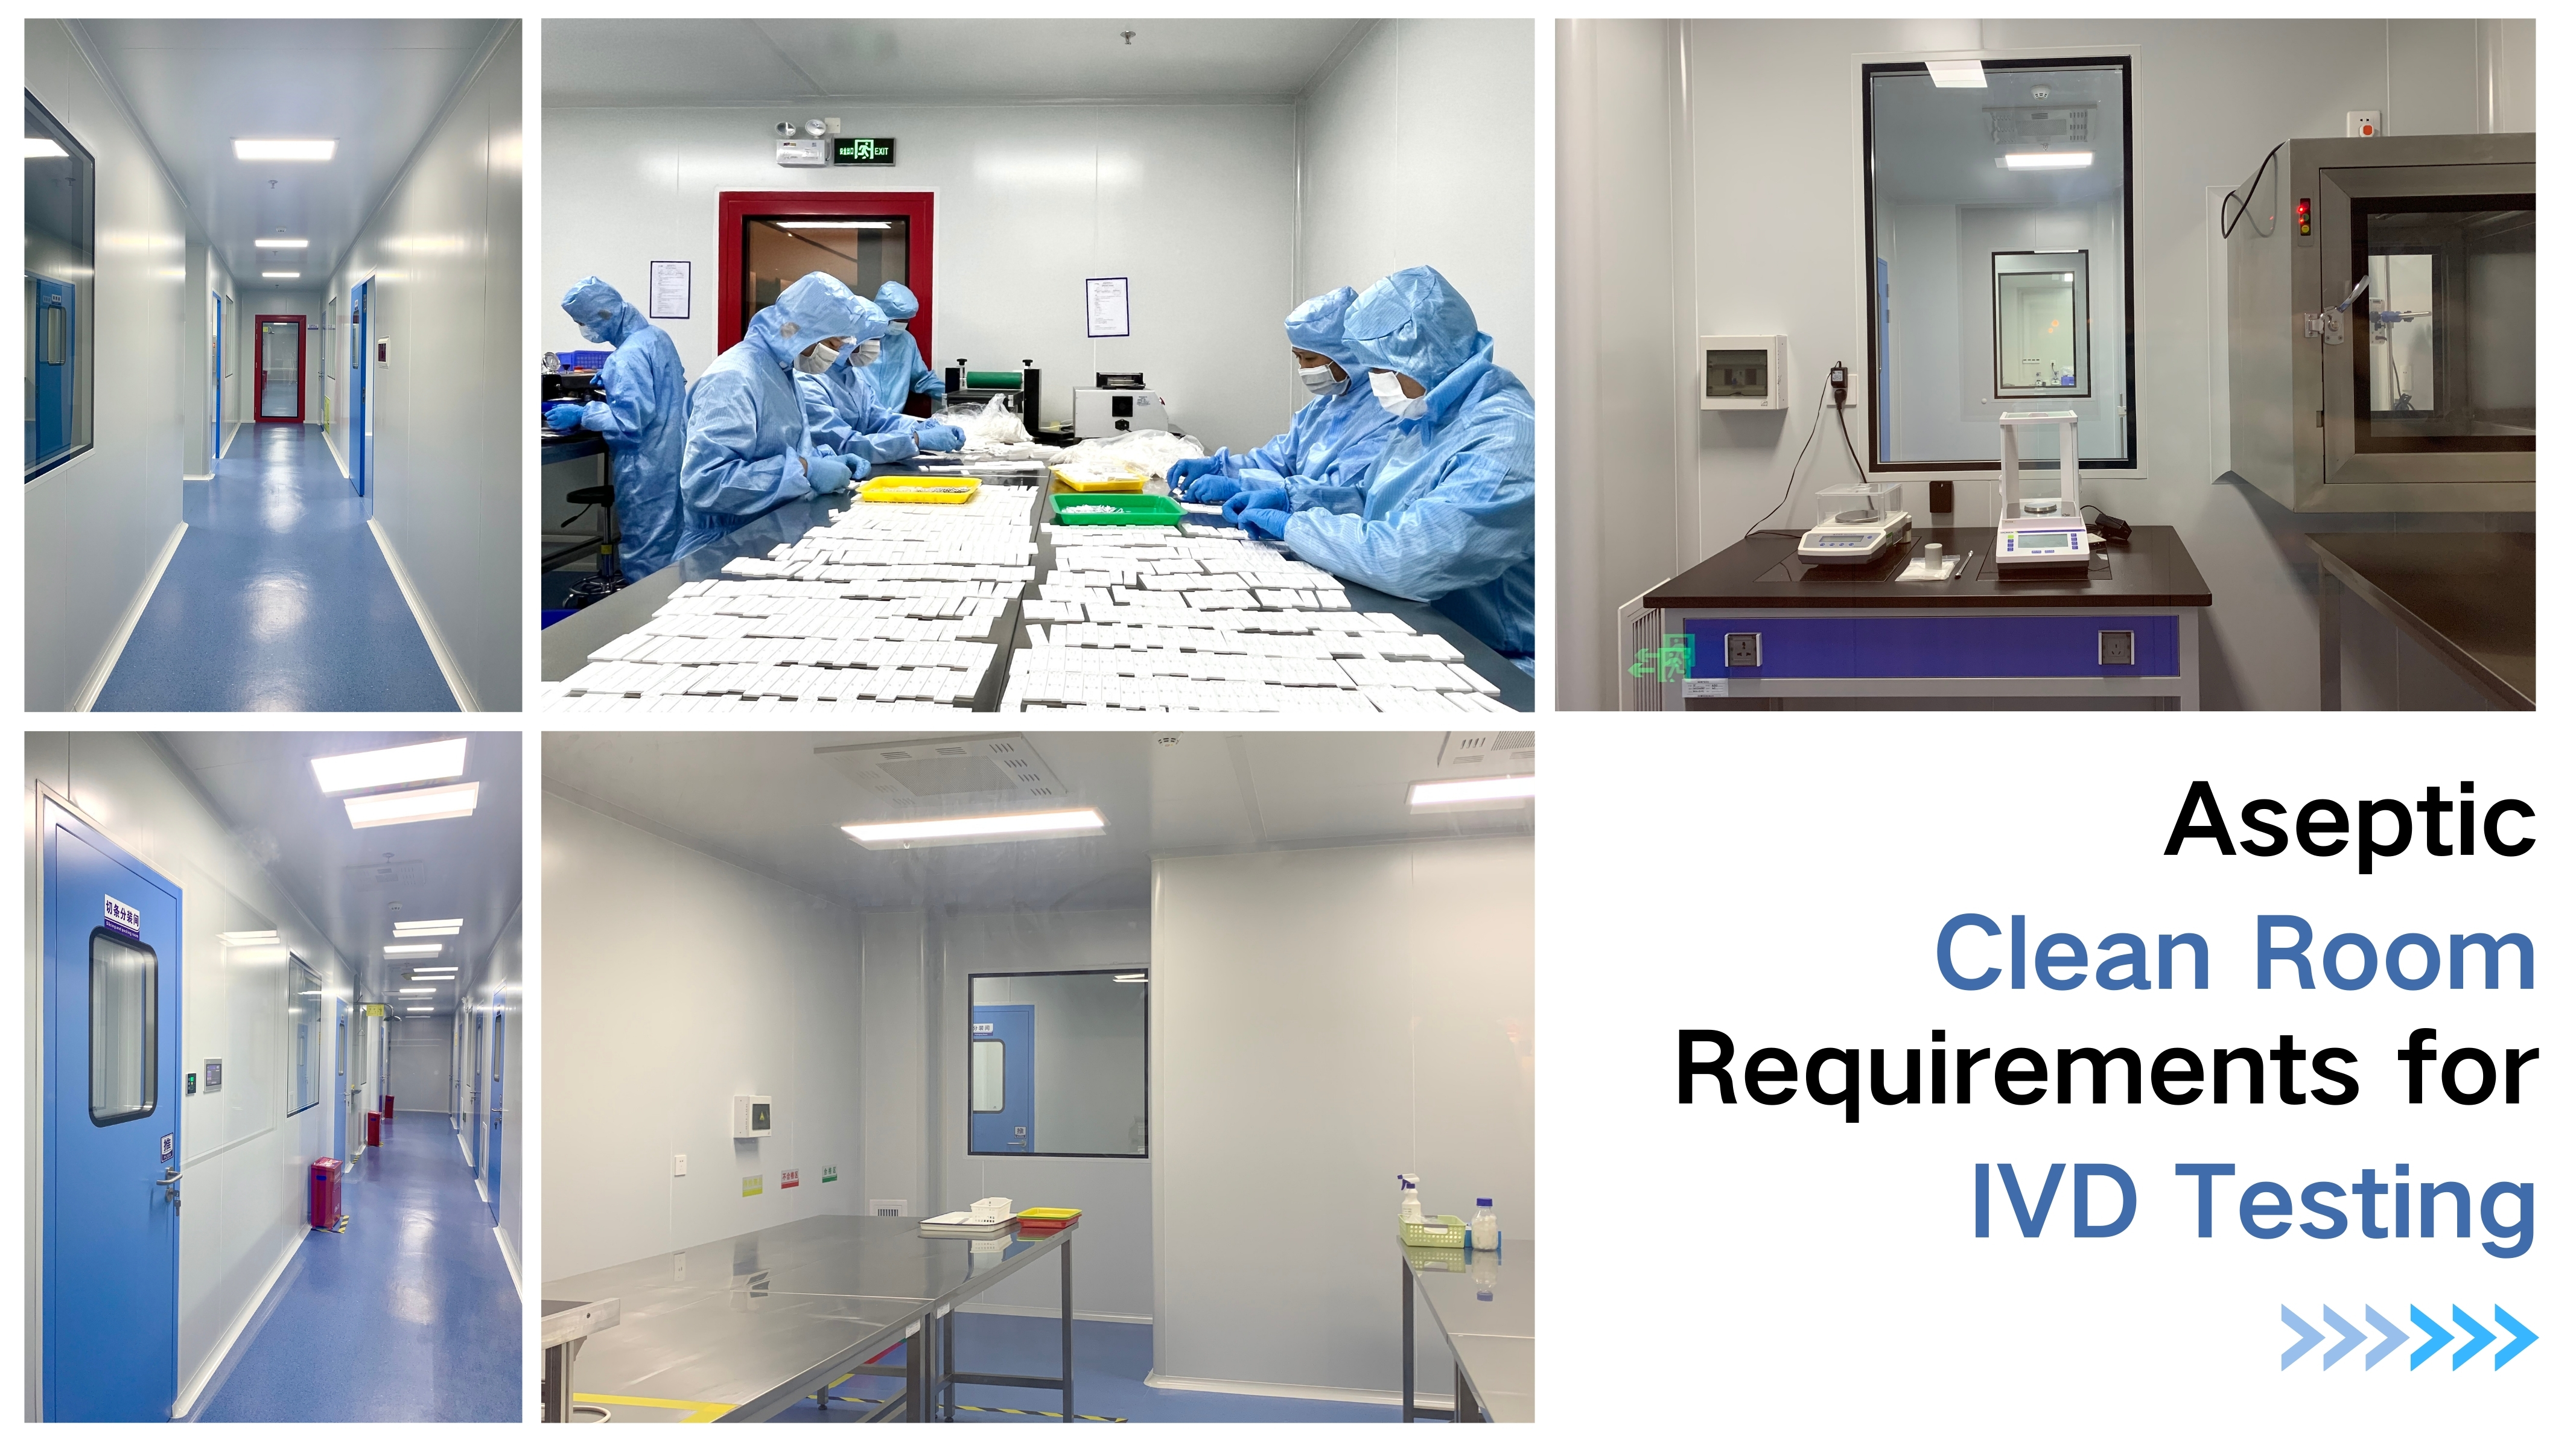 Aseptic Clean Room Requirements for IVD Testing